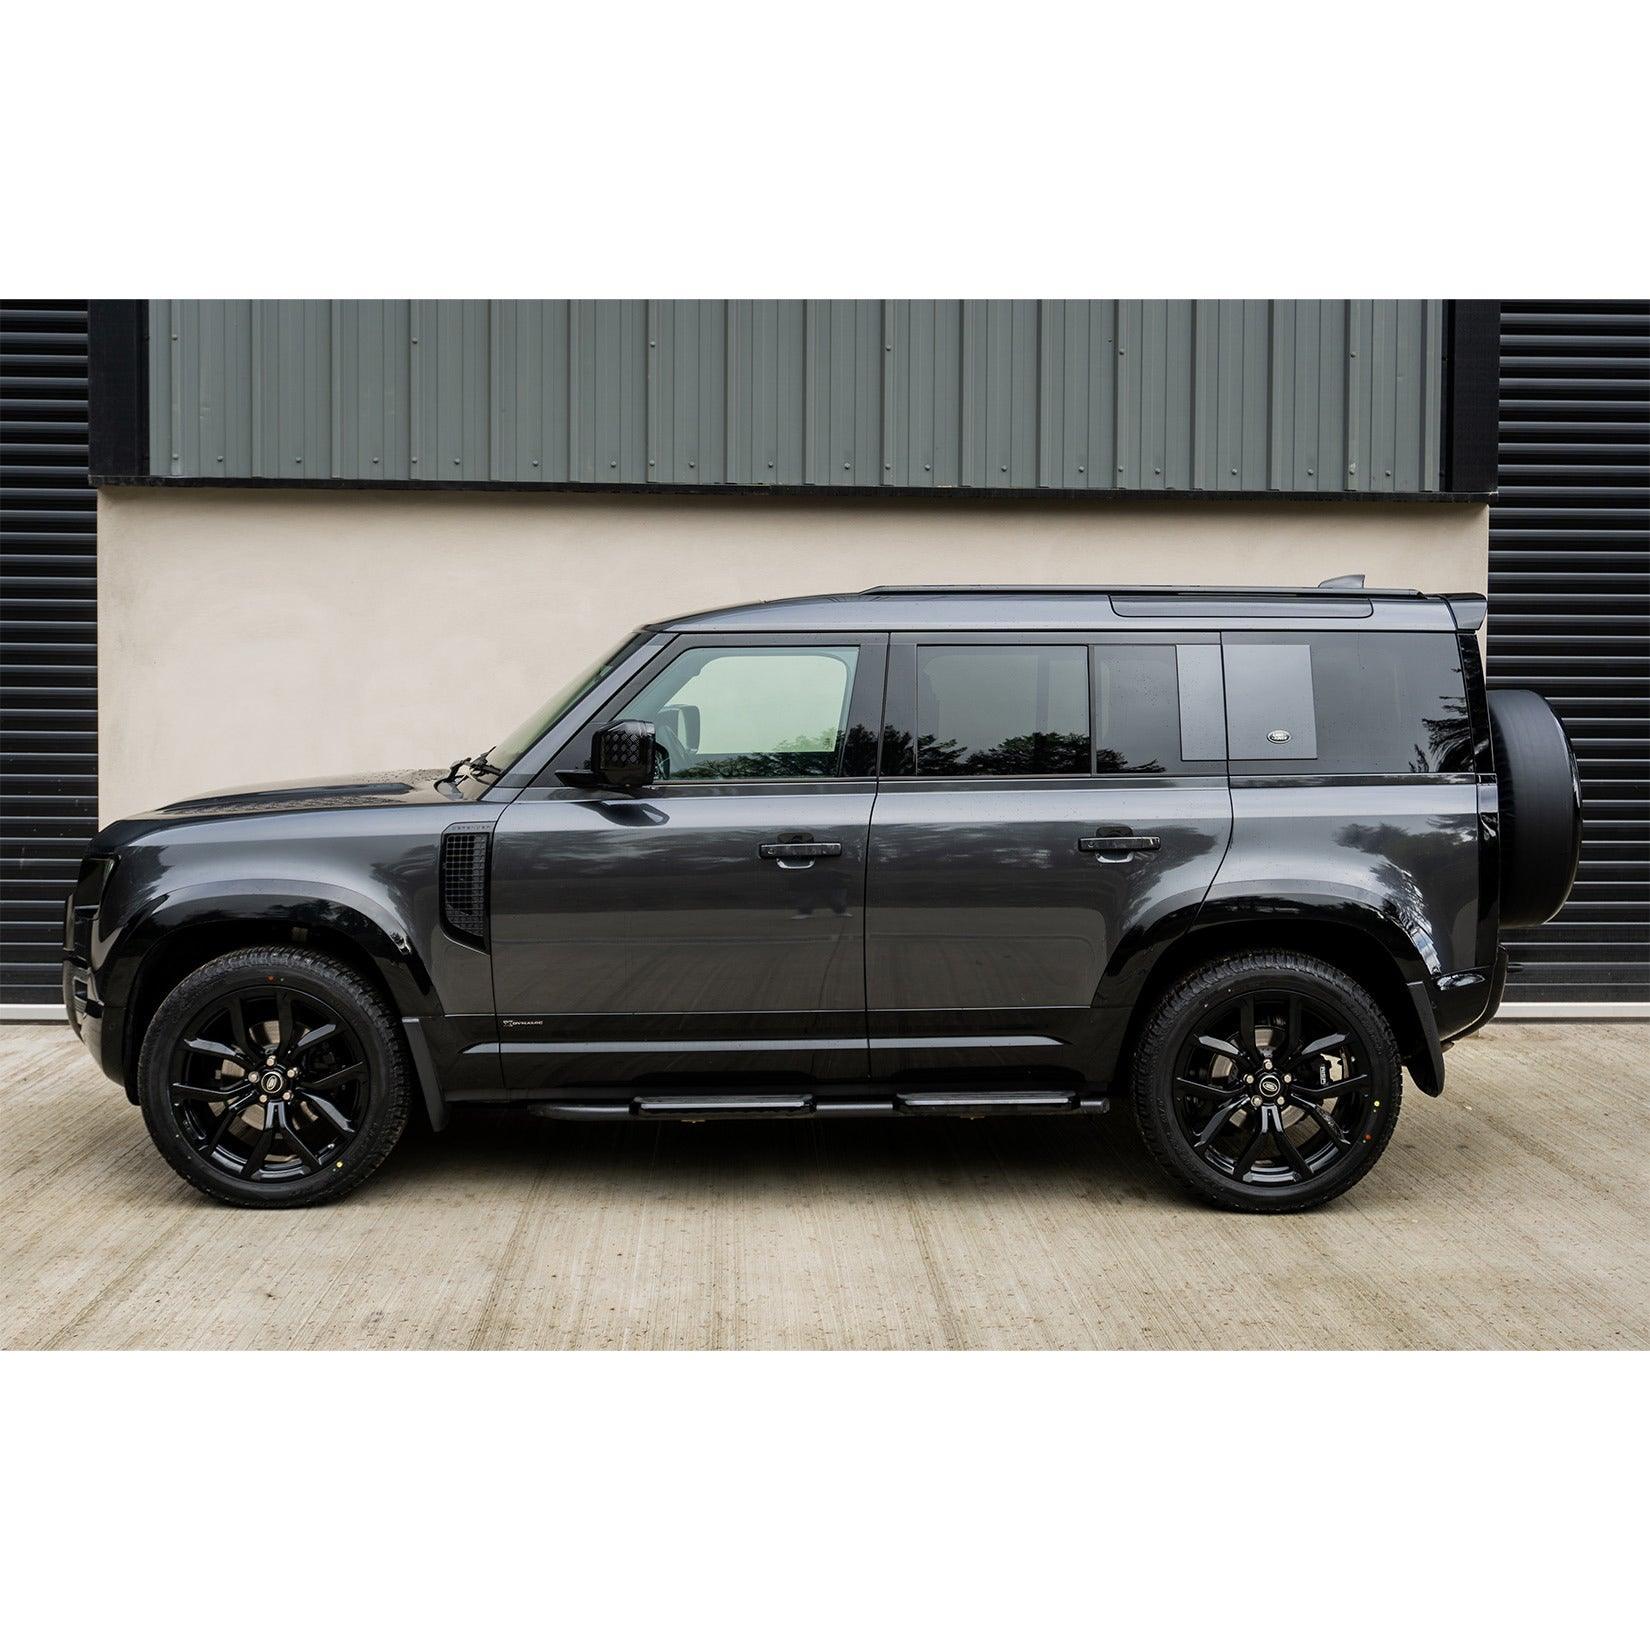 LAND ROVER DEFENDER 110 L663 2020 ON OE STYLE SIDE STEPS - PAIR - IN BLACK (WITH LOGO) - Storm Xccessories2